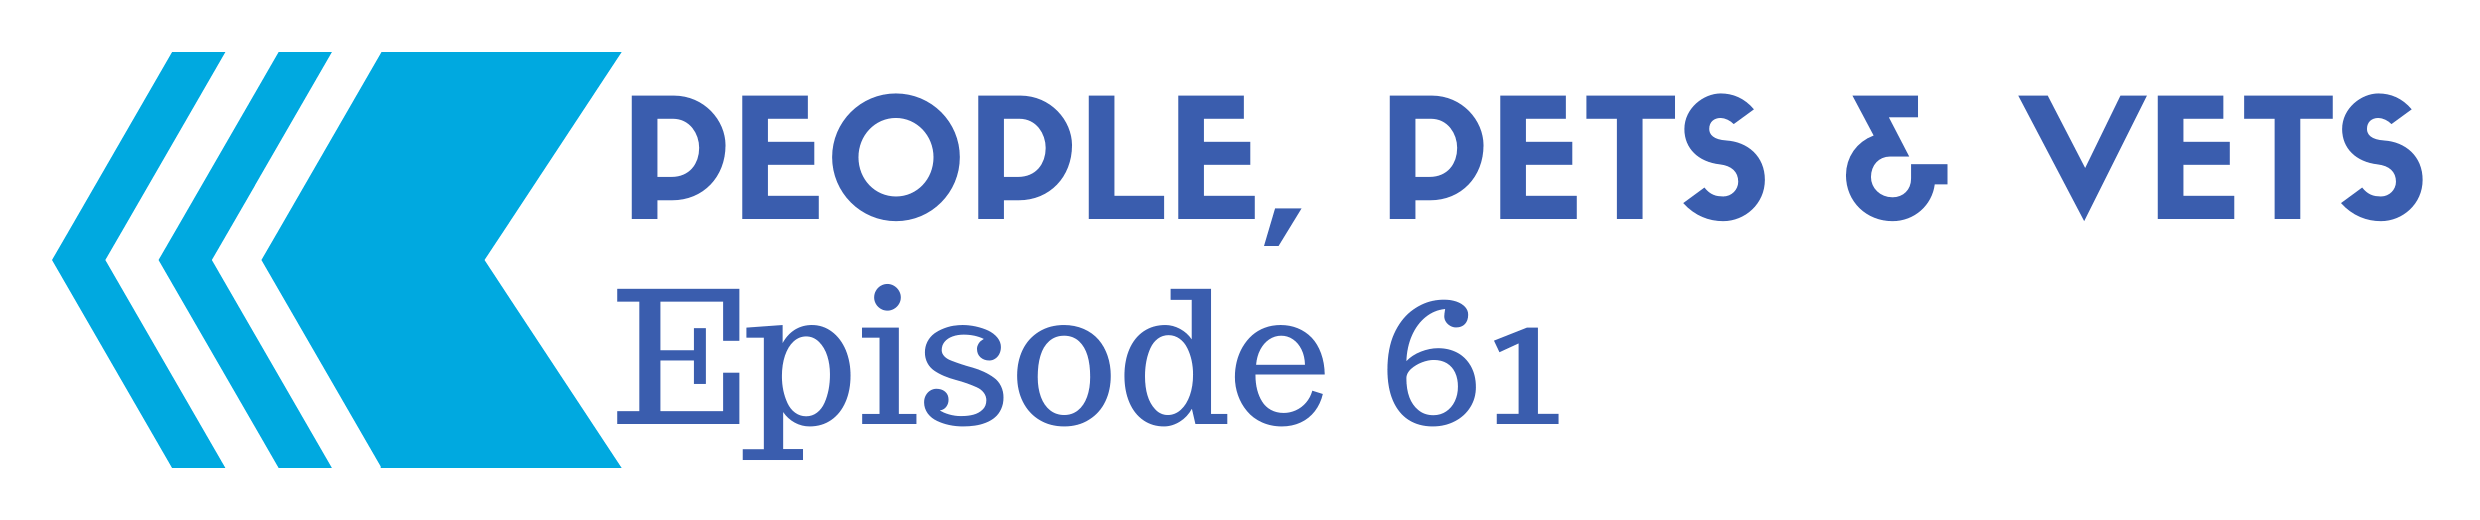 Back to Episode 61